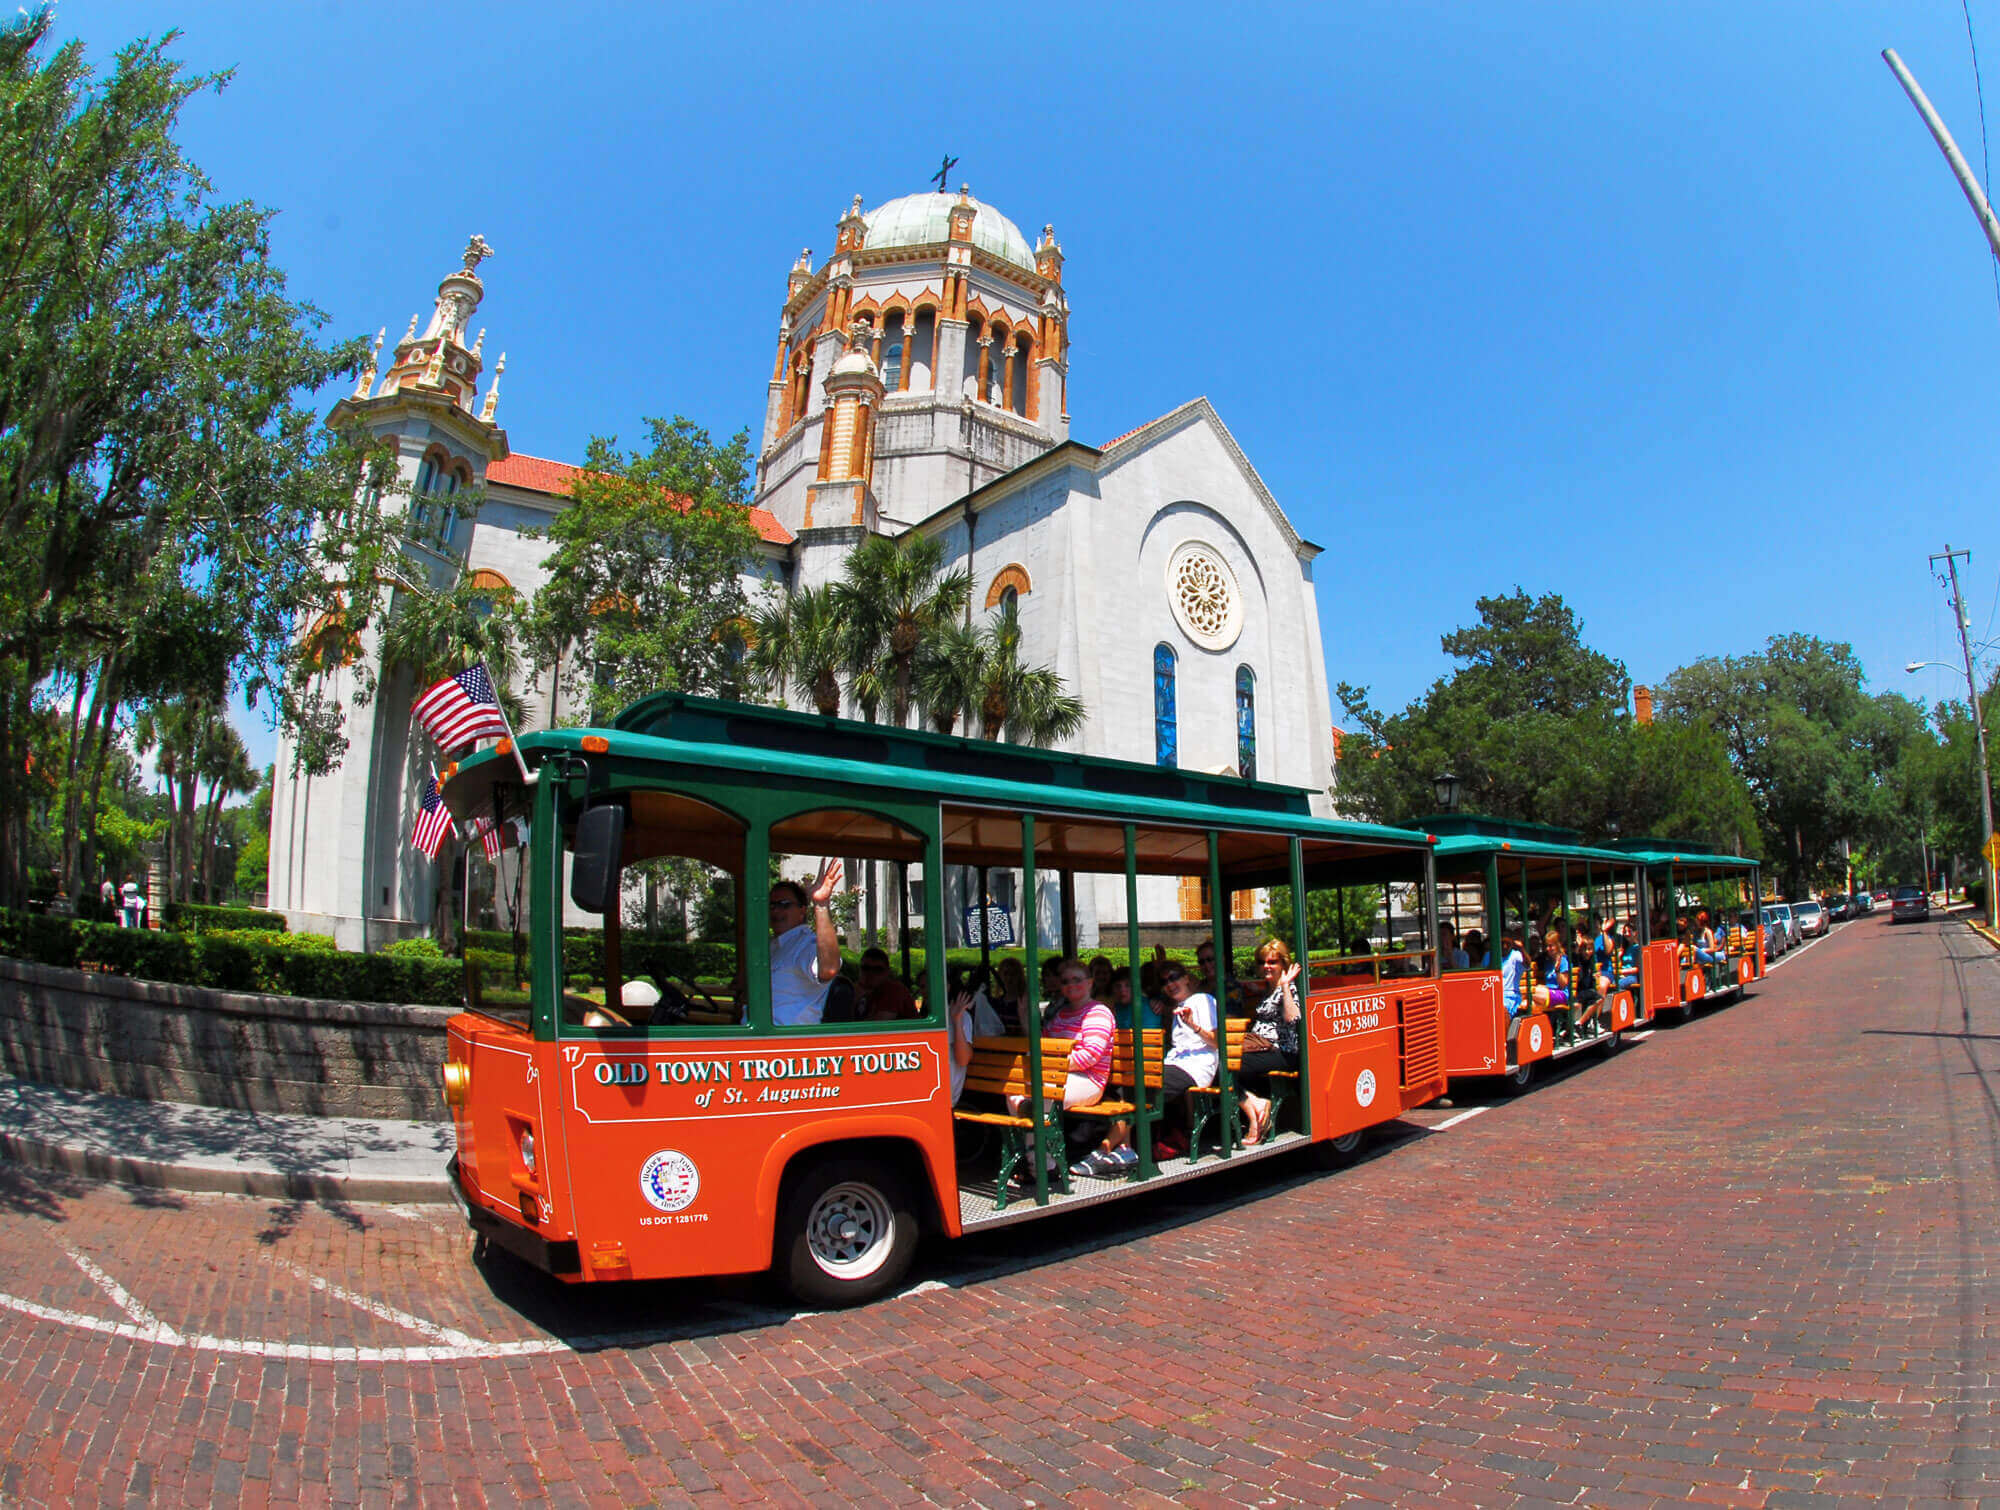 The Old Town Trolley giving a tour in front of the Memorial Presbyterian Church built by Henry Flagler in St. Augustine, FL